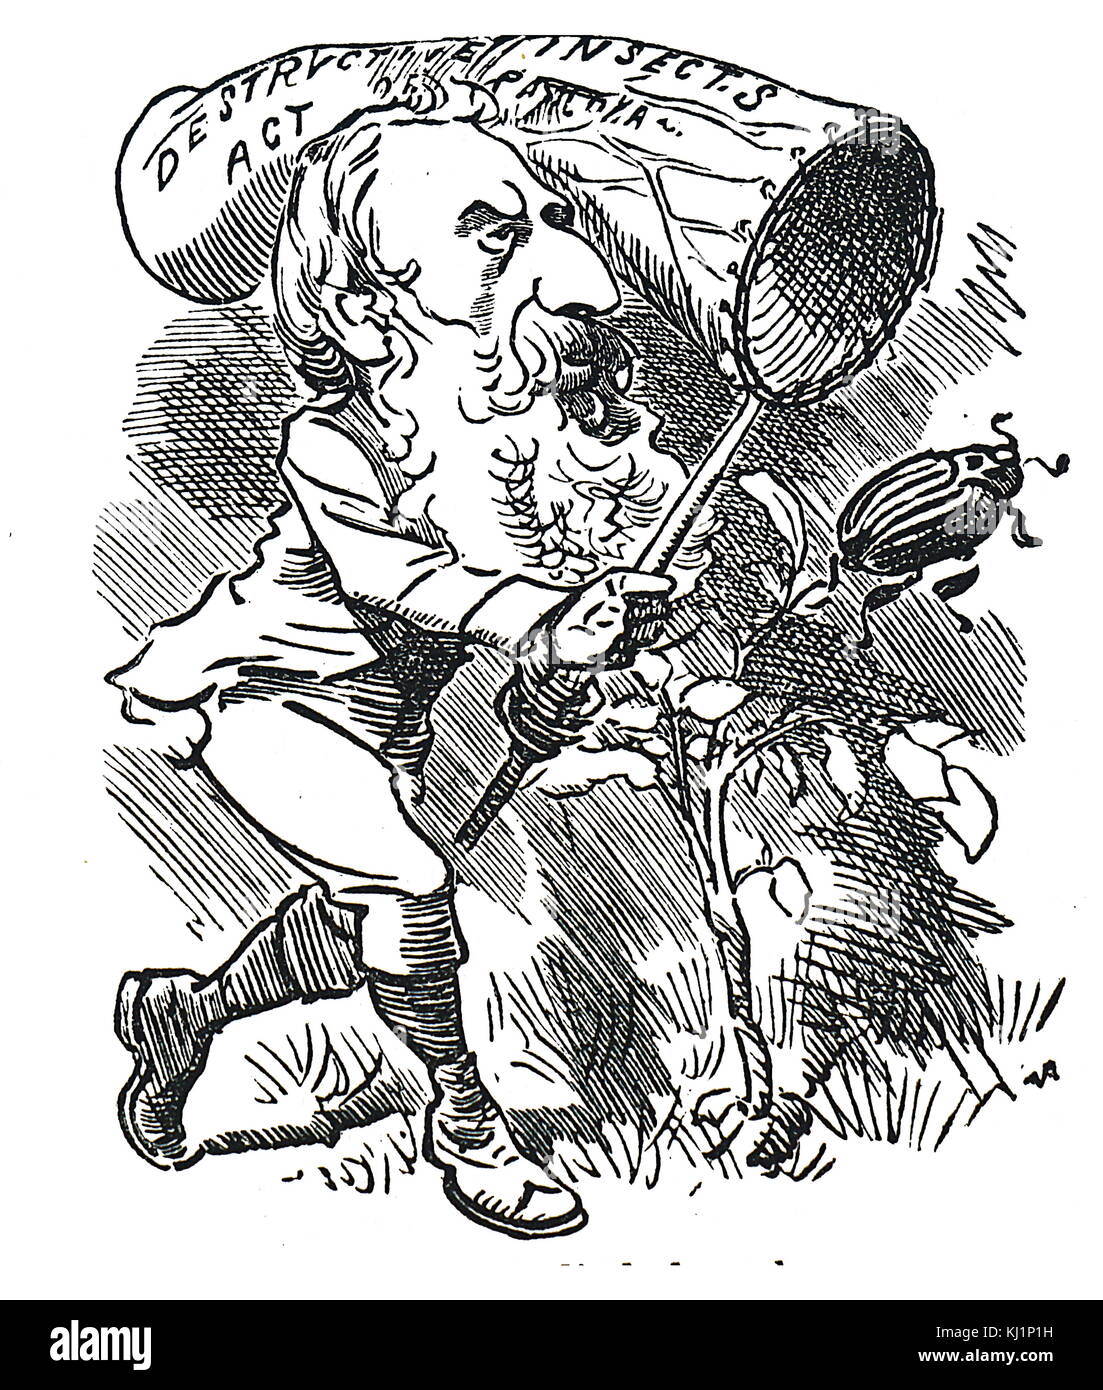 Cartoon depicting a Colorado Beetle: Fear of its spread to Britain led to an Order in Council ordering the destruction of any specimens found. Also pictured is A. J. Mundella. Dated 19th Century Stock Photo